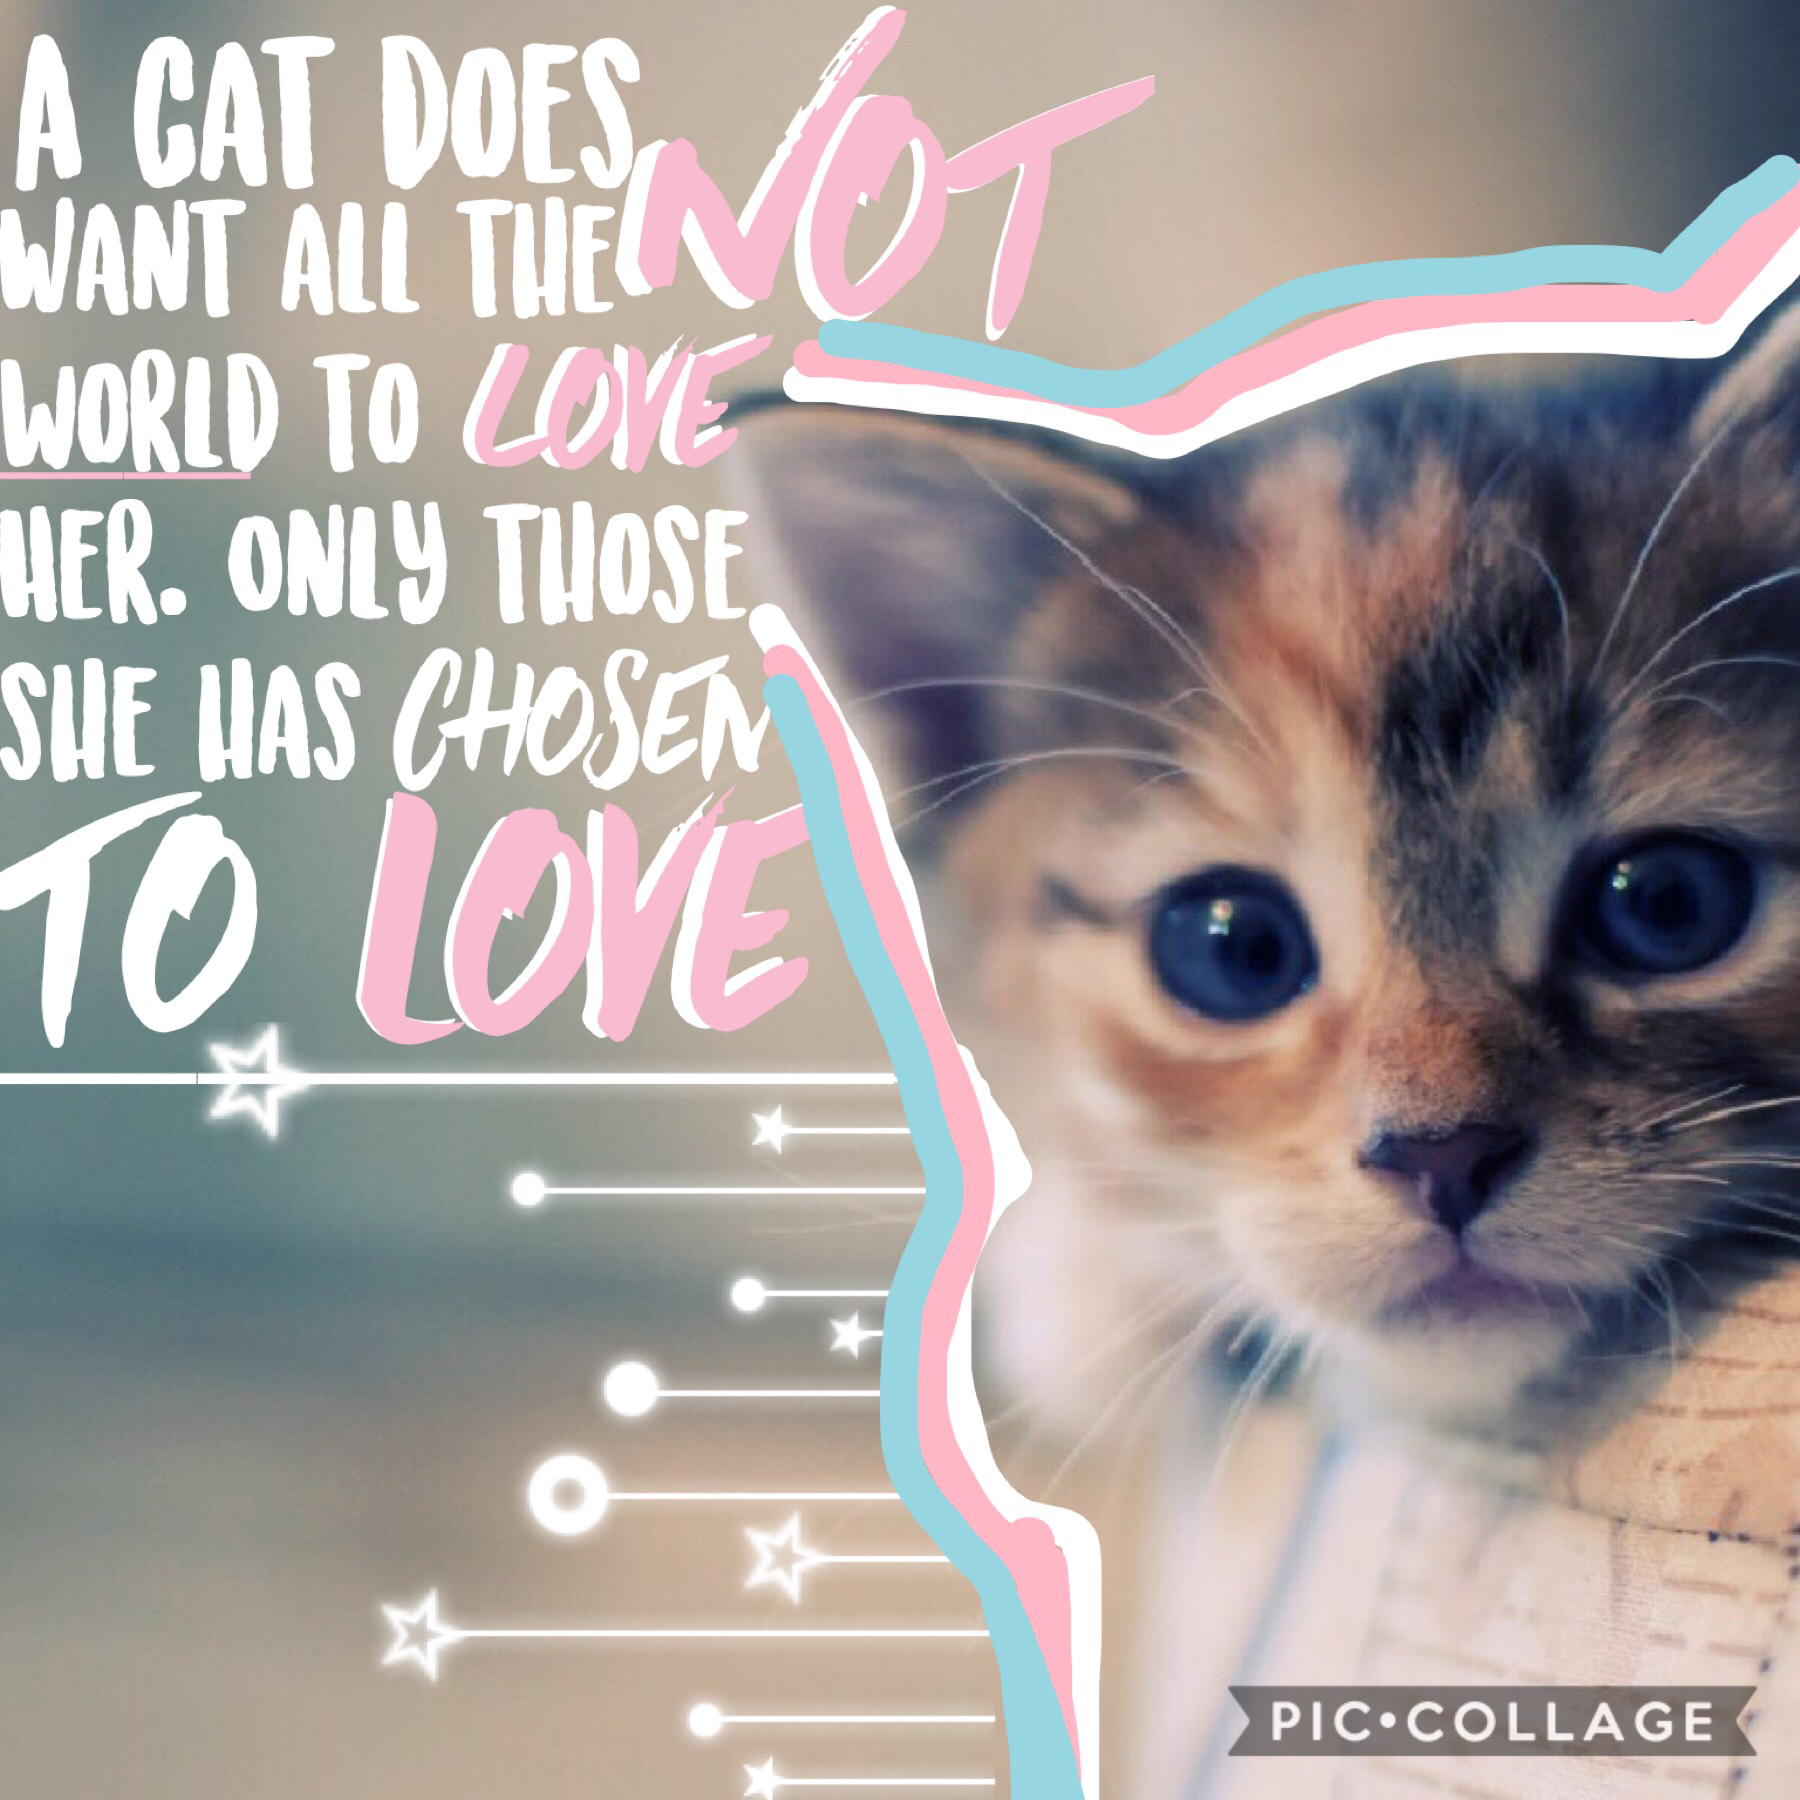 Cats❤️❤️tappy tap
Well I’m soooo tired ermm... so I made this lazy post. The cat was so cute really! What do you guys think?